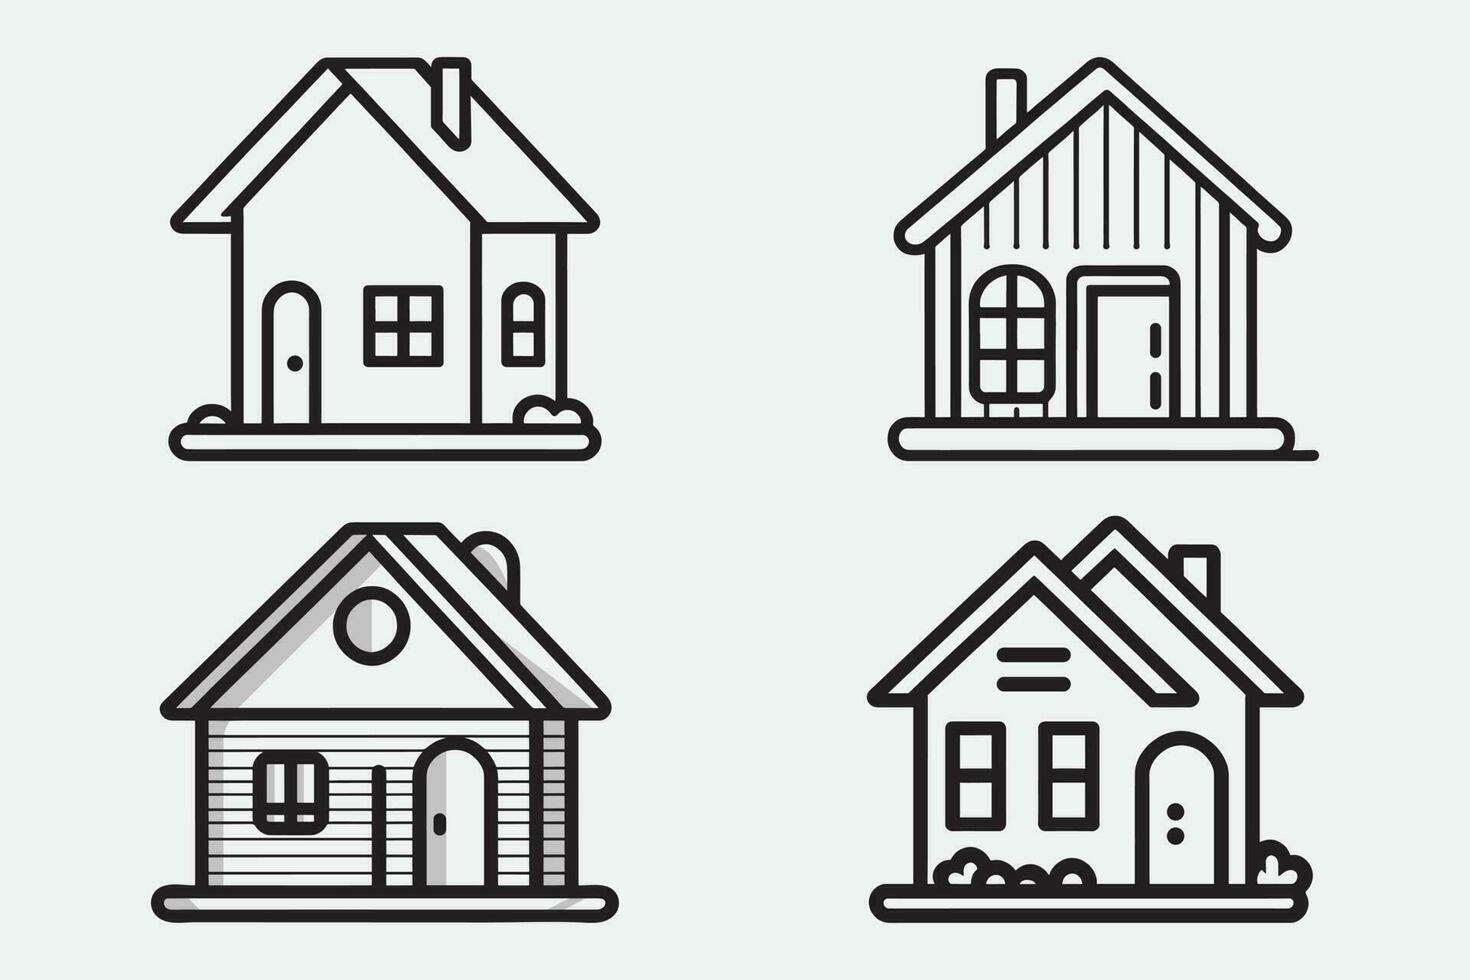 Home Icon set, Illustration of house icons, Black and white house icon, Outline Style, Home line art icons, clean simple design vector